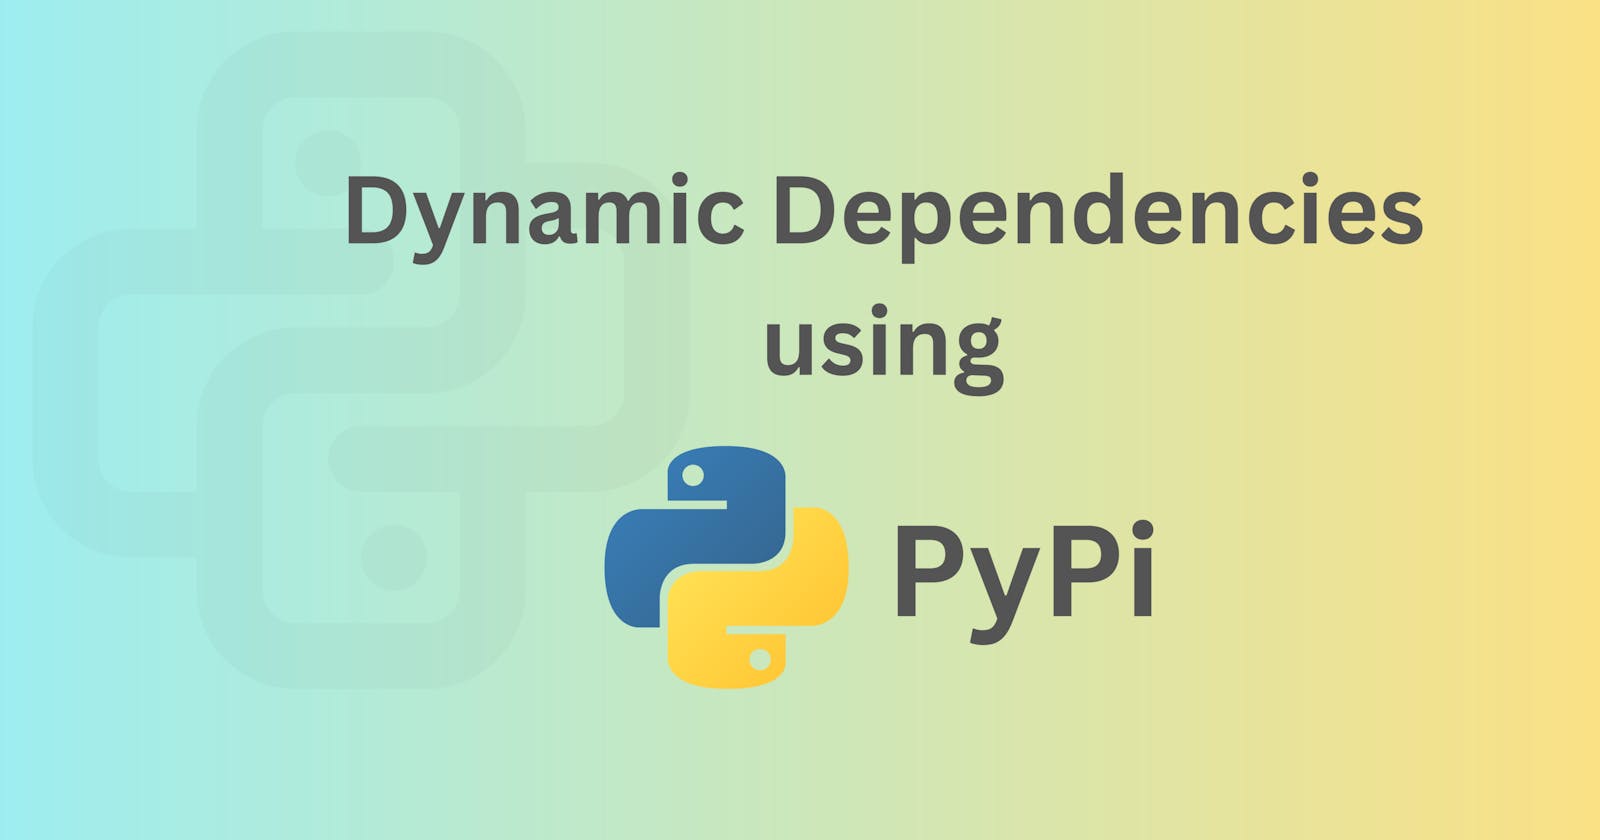 Dynamically Managing Dependencies In Your Python Projects